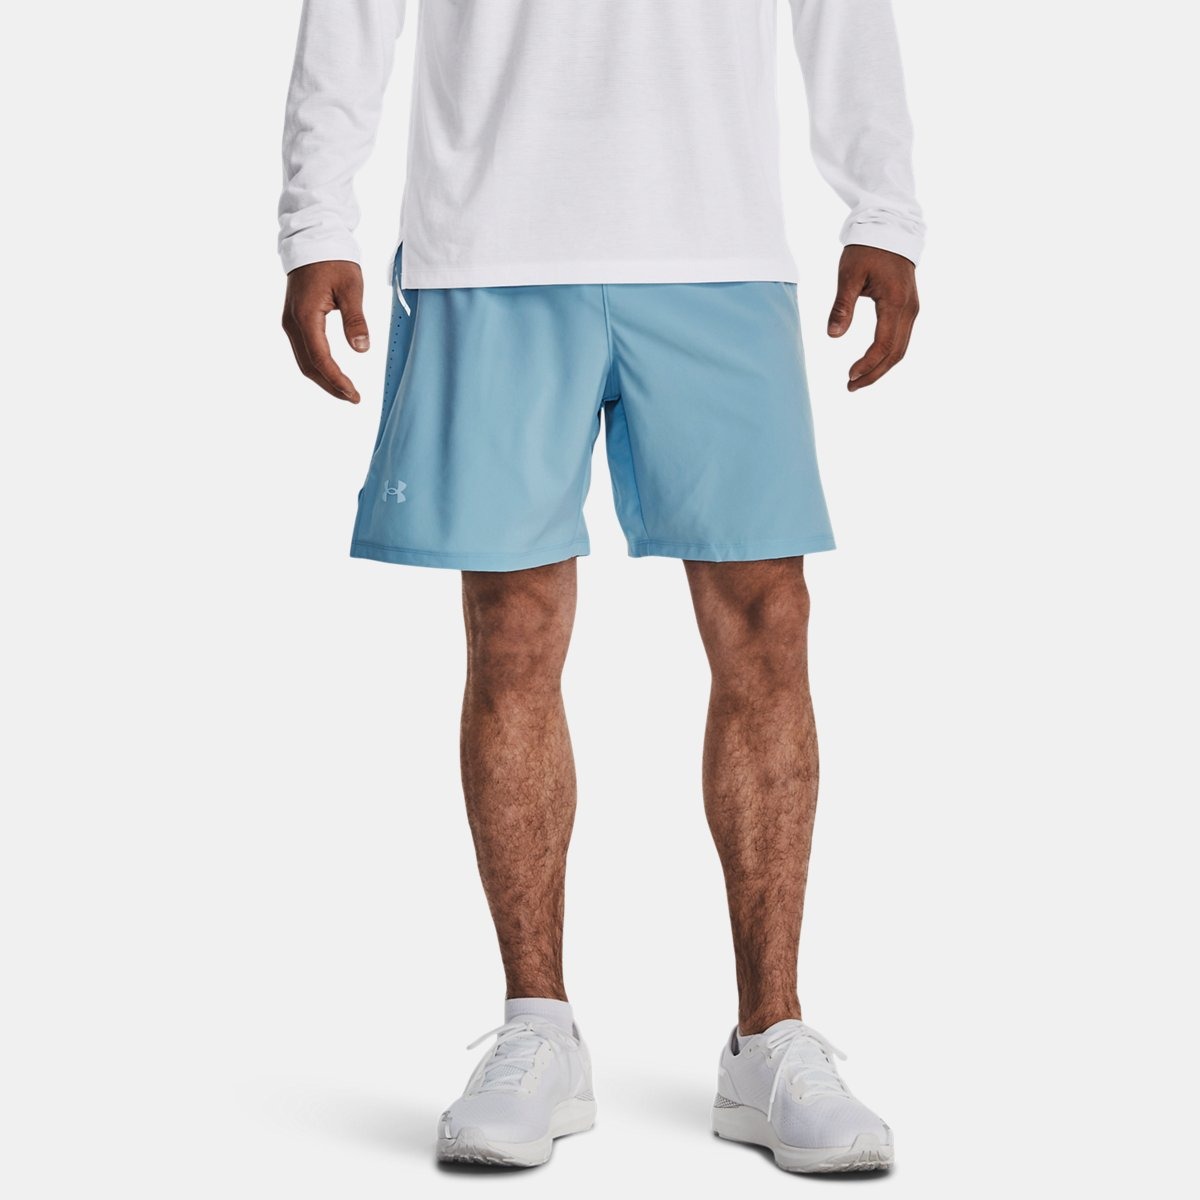 Blue Shorts for Men at Under Armour GOOFASH